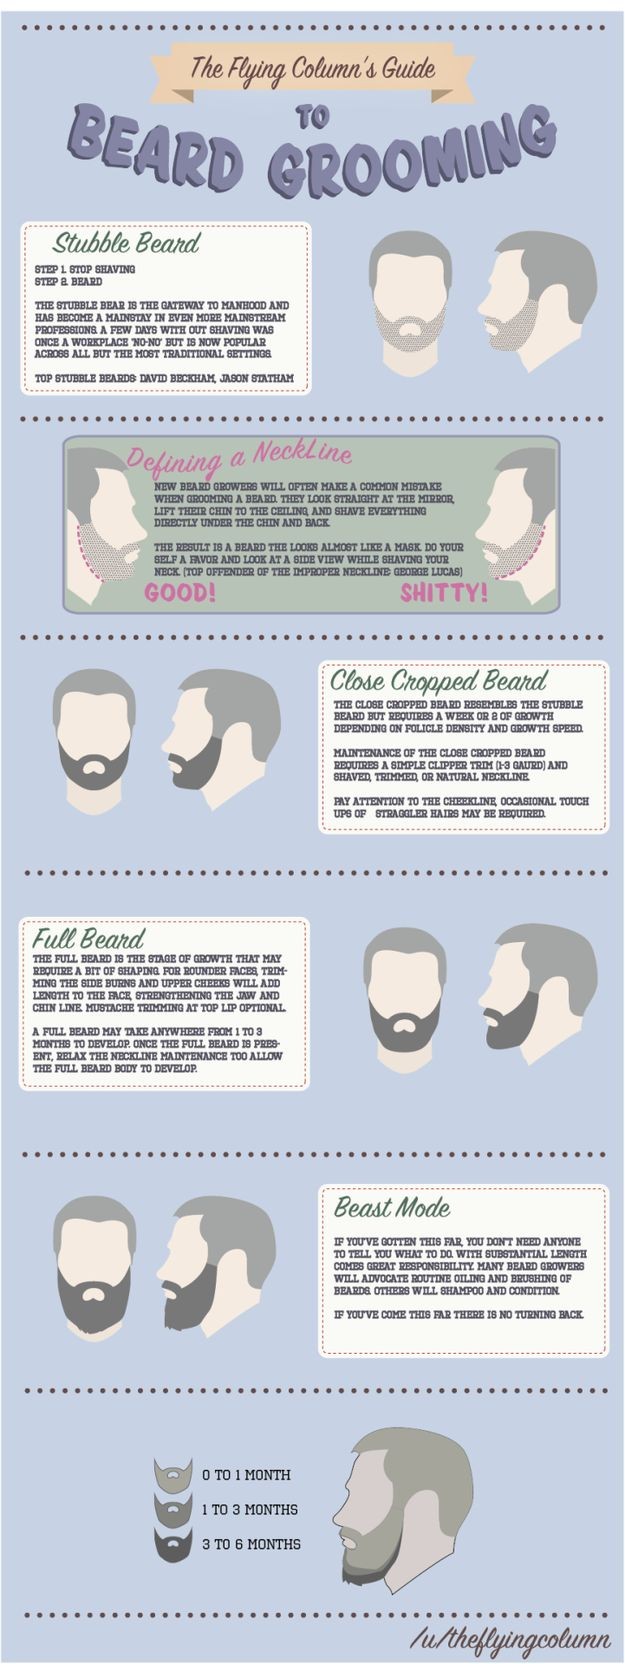 And here’s how to get the best beard possibl...